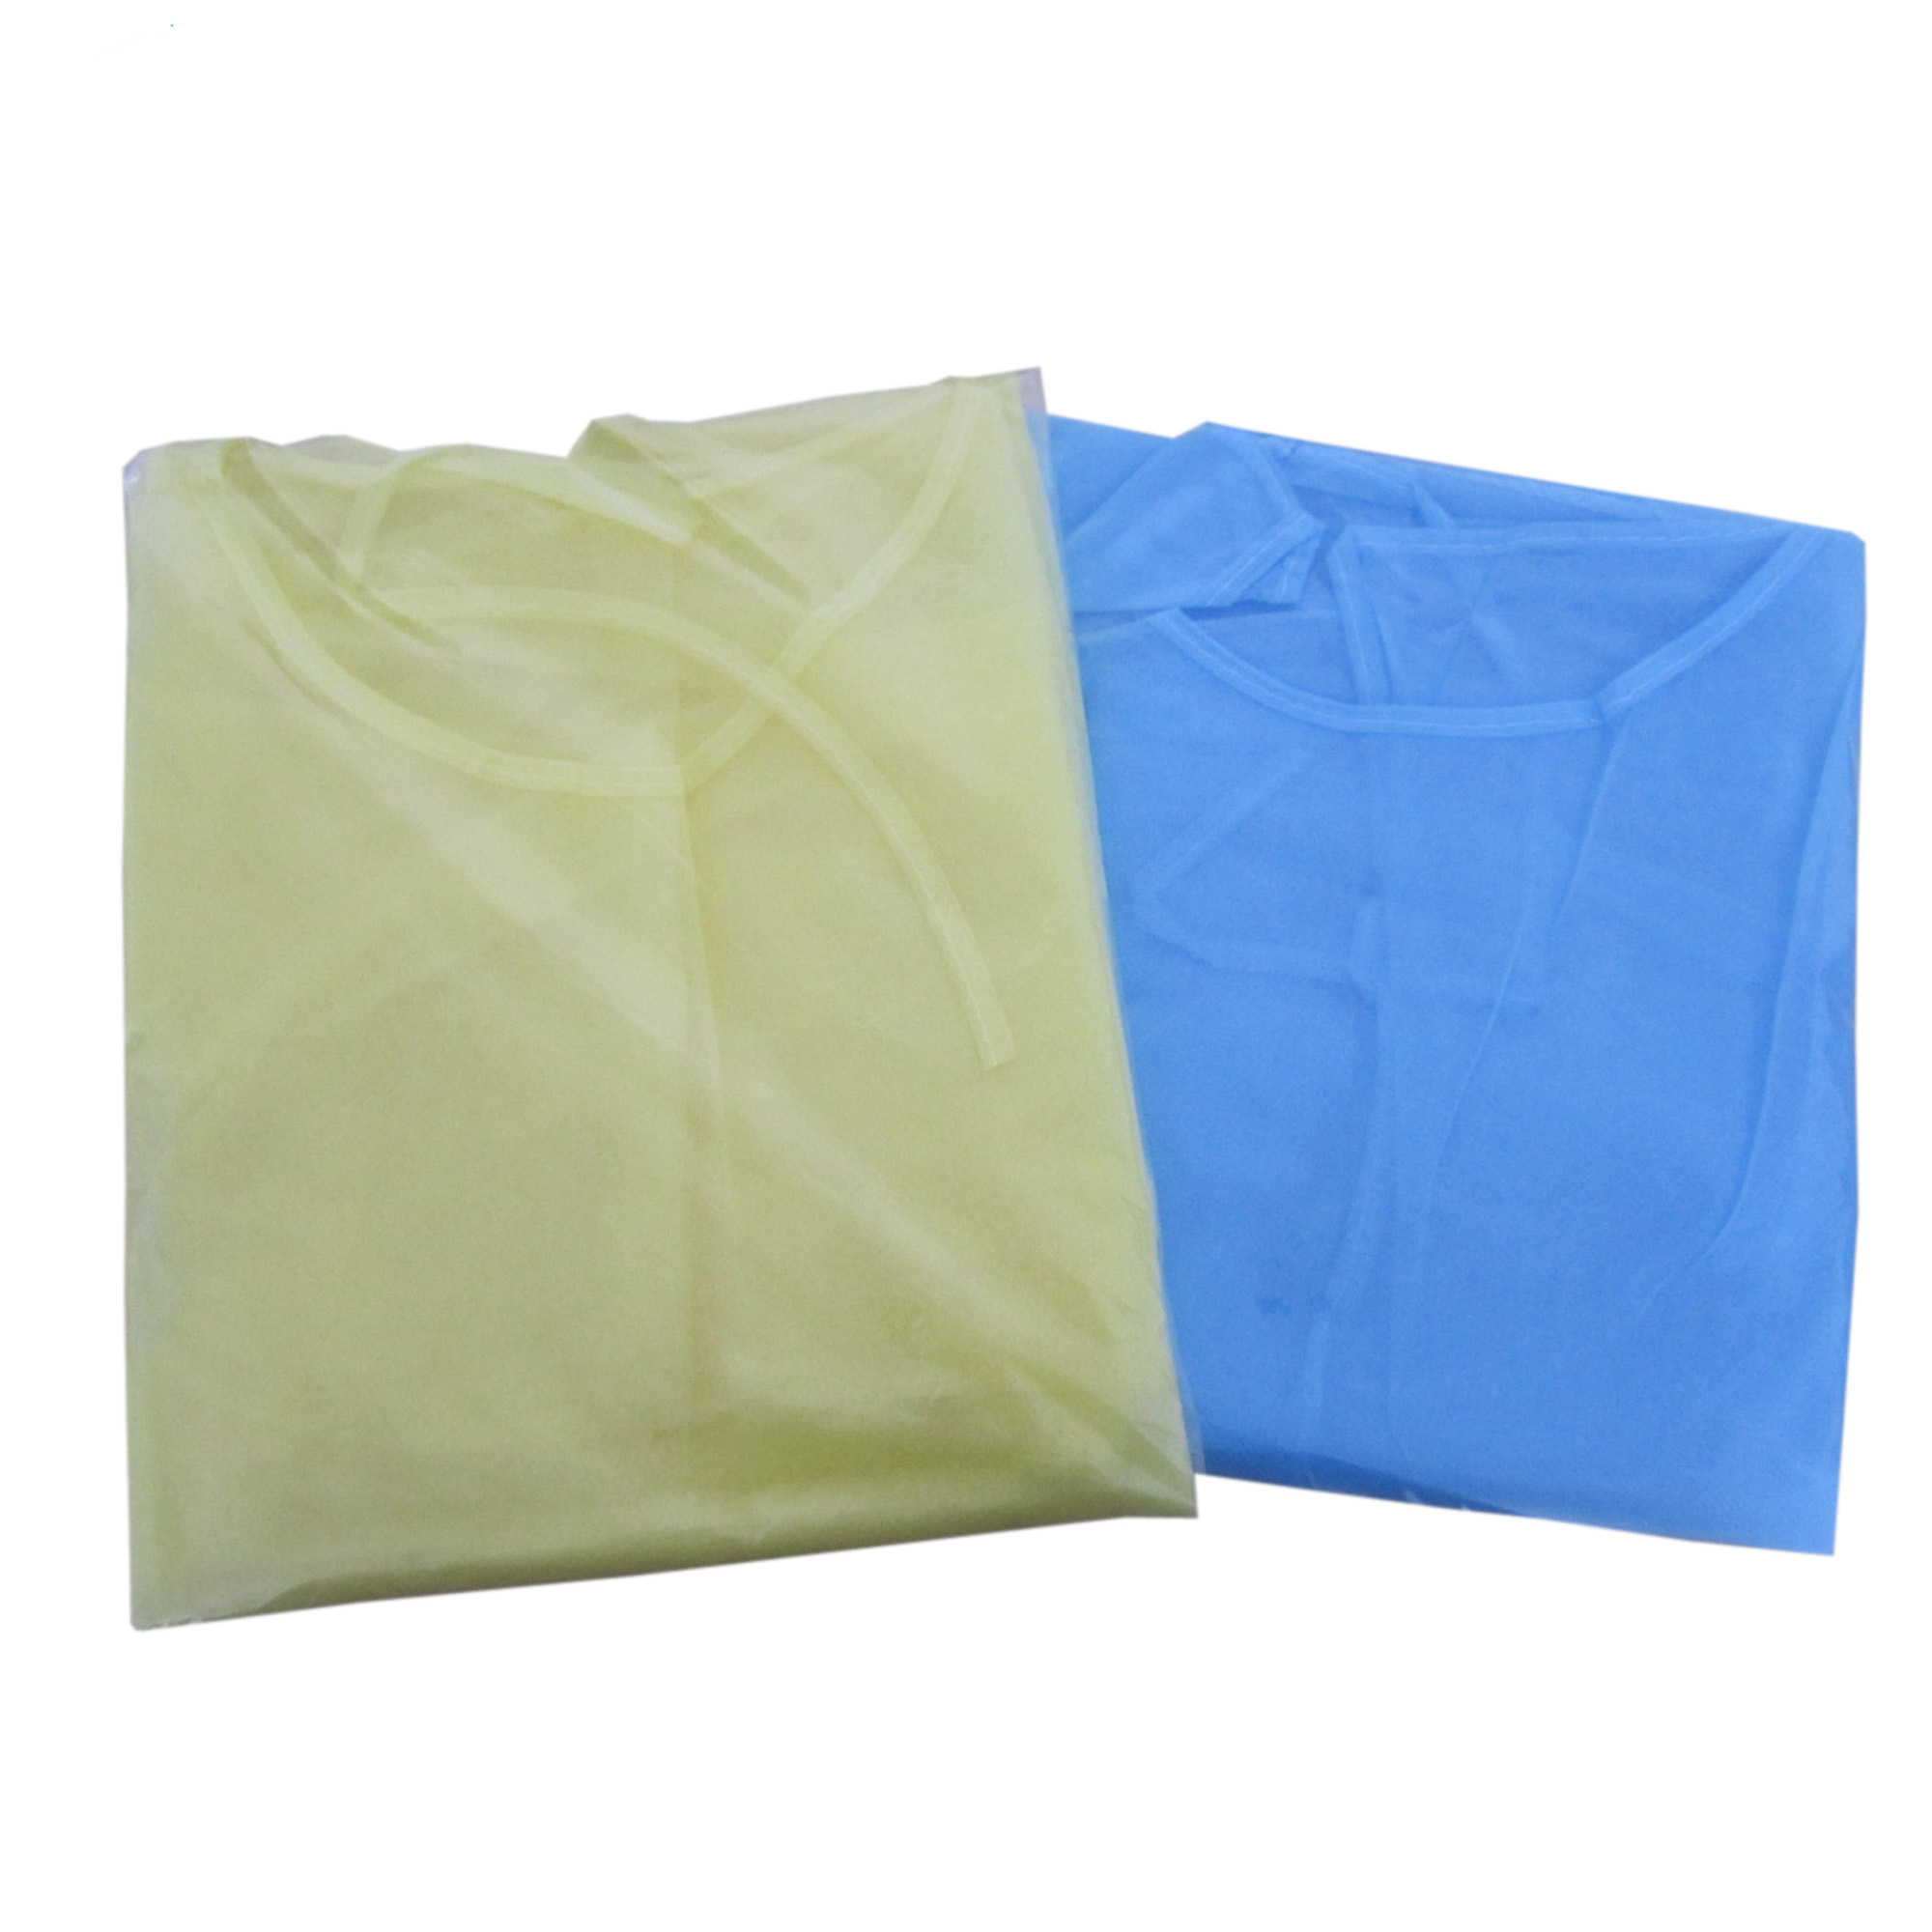 Sterile SMS Disposable hospital Isolation Gown Surgical Gown With Rib Cuff AAMI Level 3